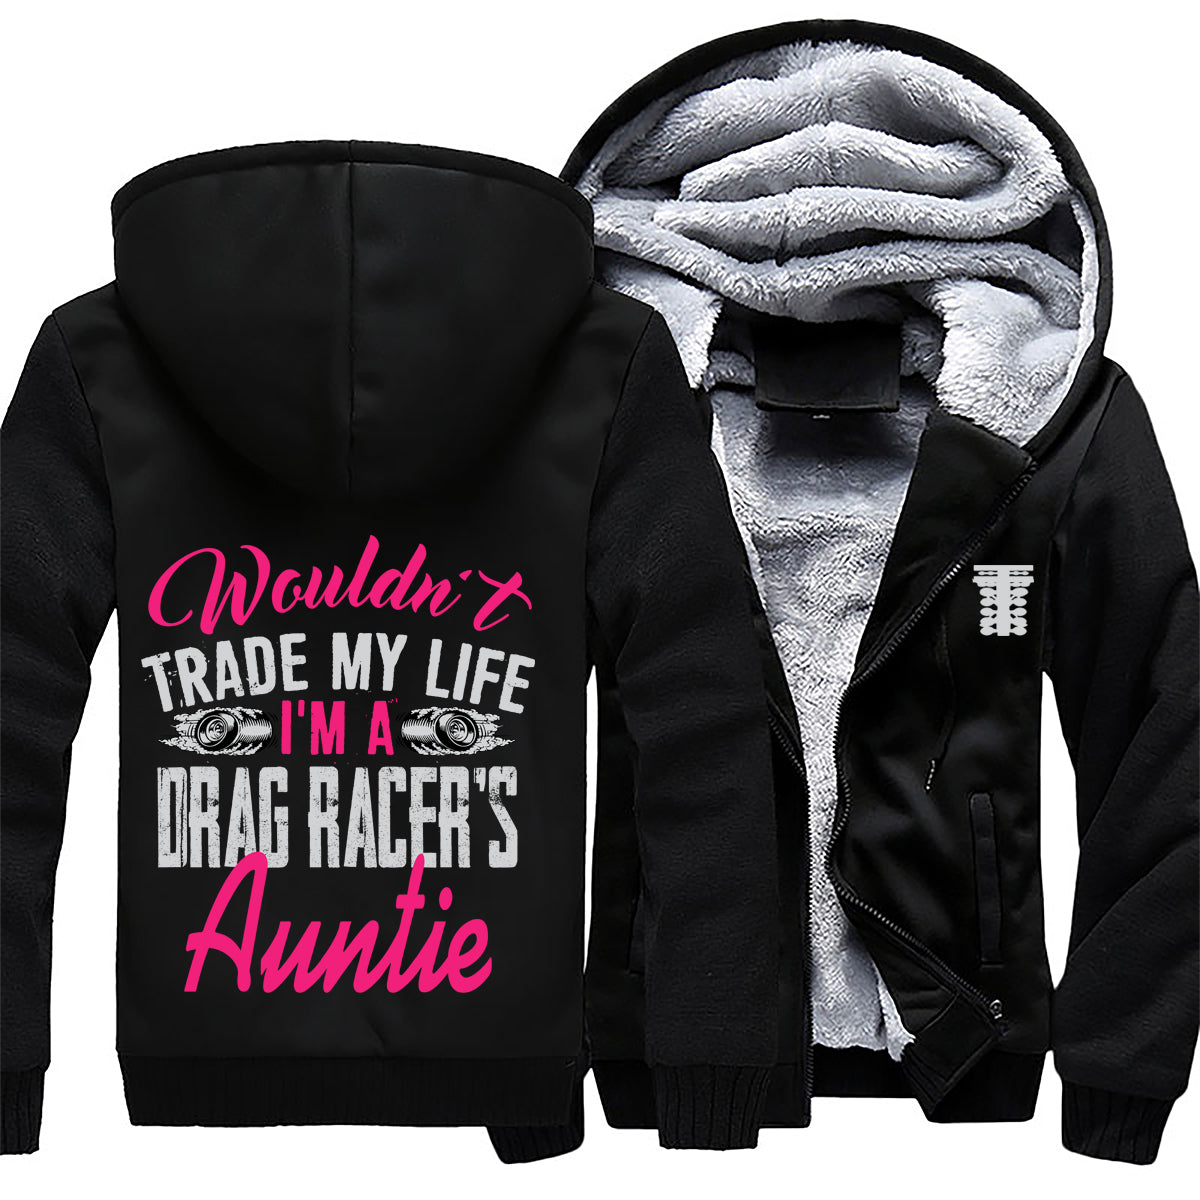 I'm A Drag Racer's Auntie Jacket 